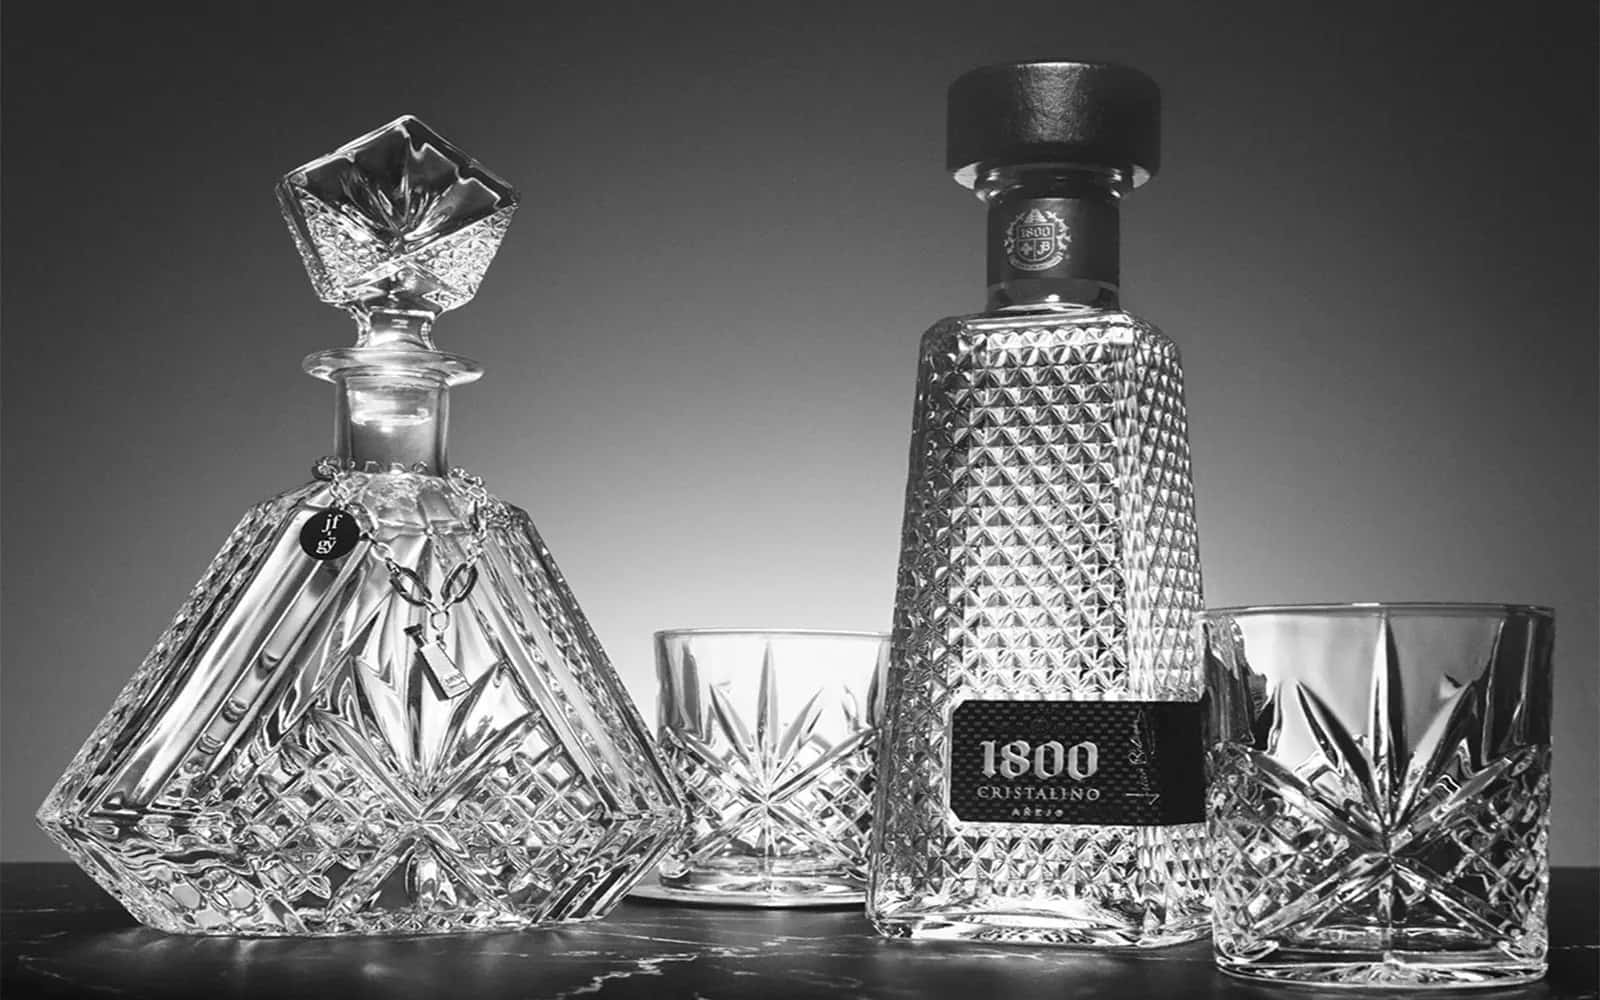 1800 Tequila Cristalino Anejo With Crystal Decanter Wallpaper